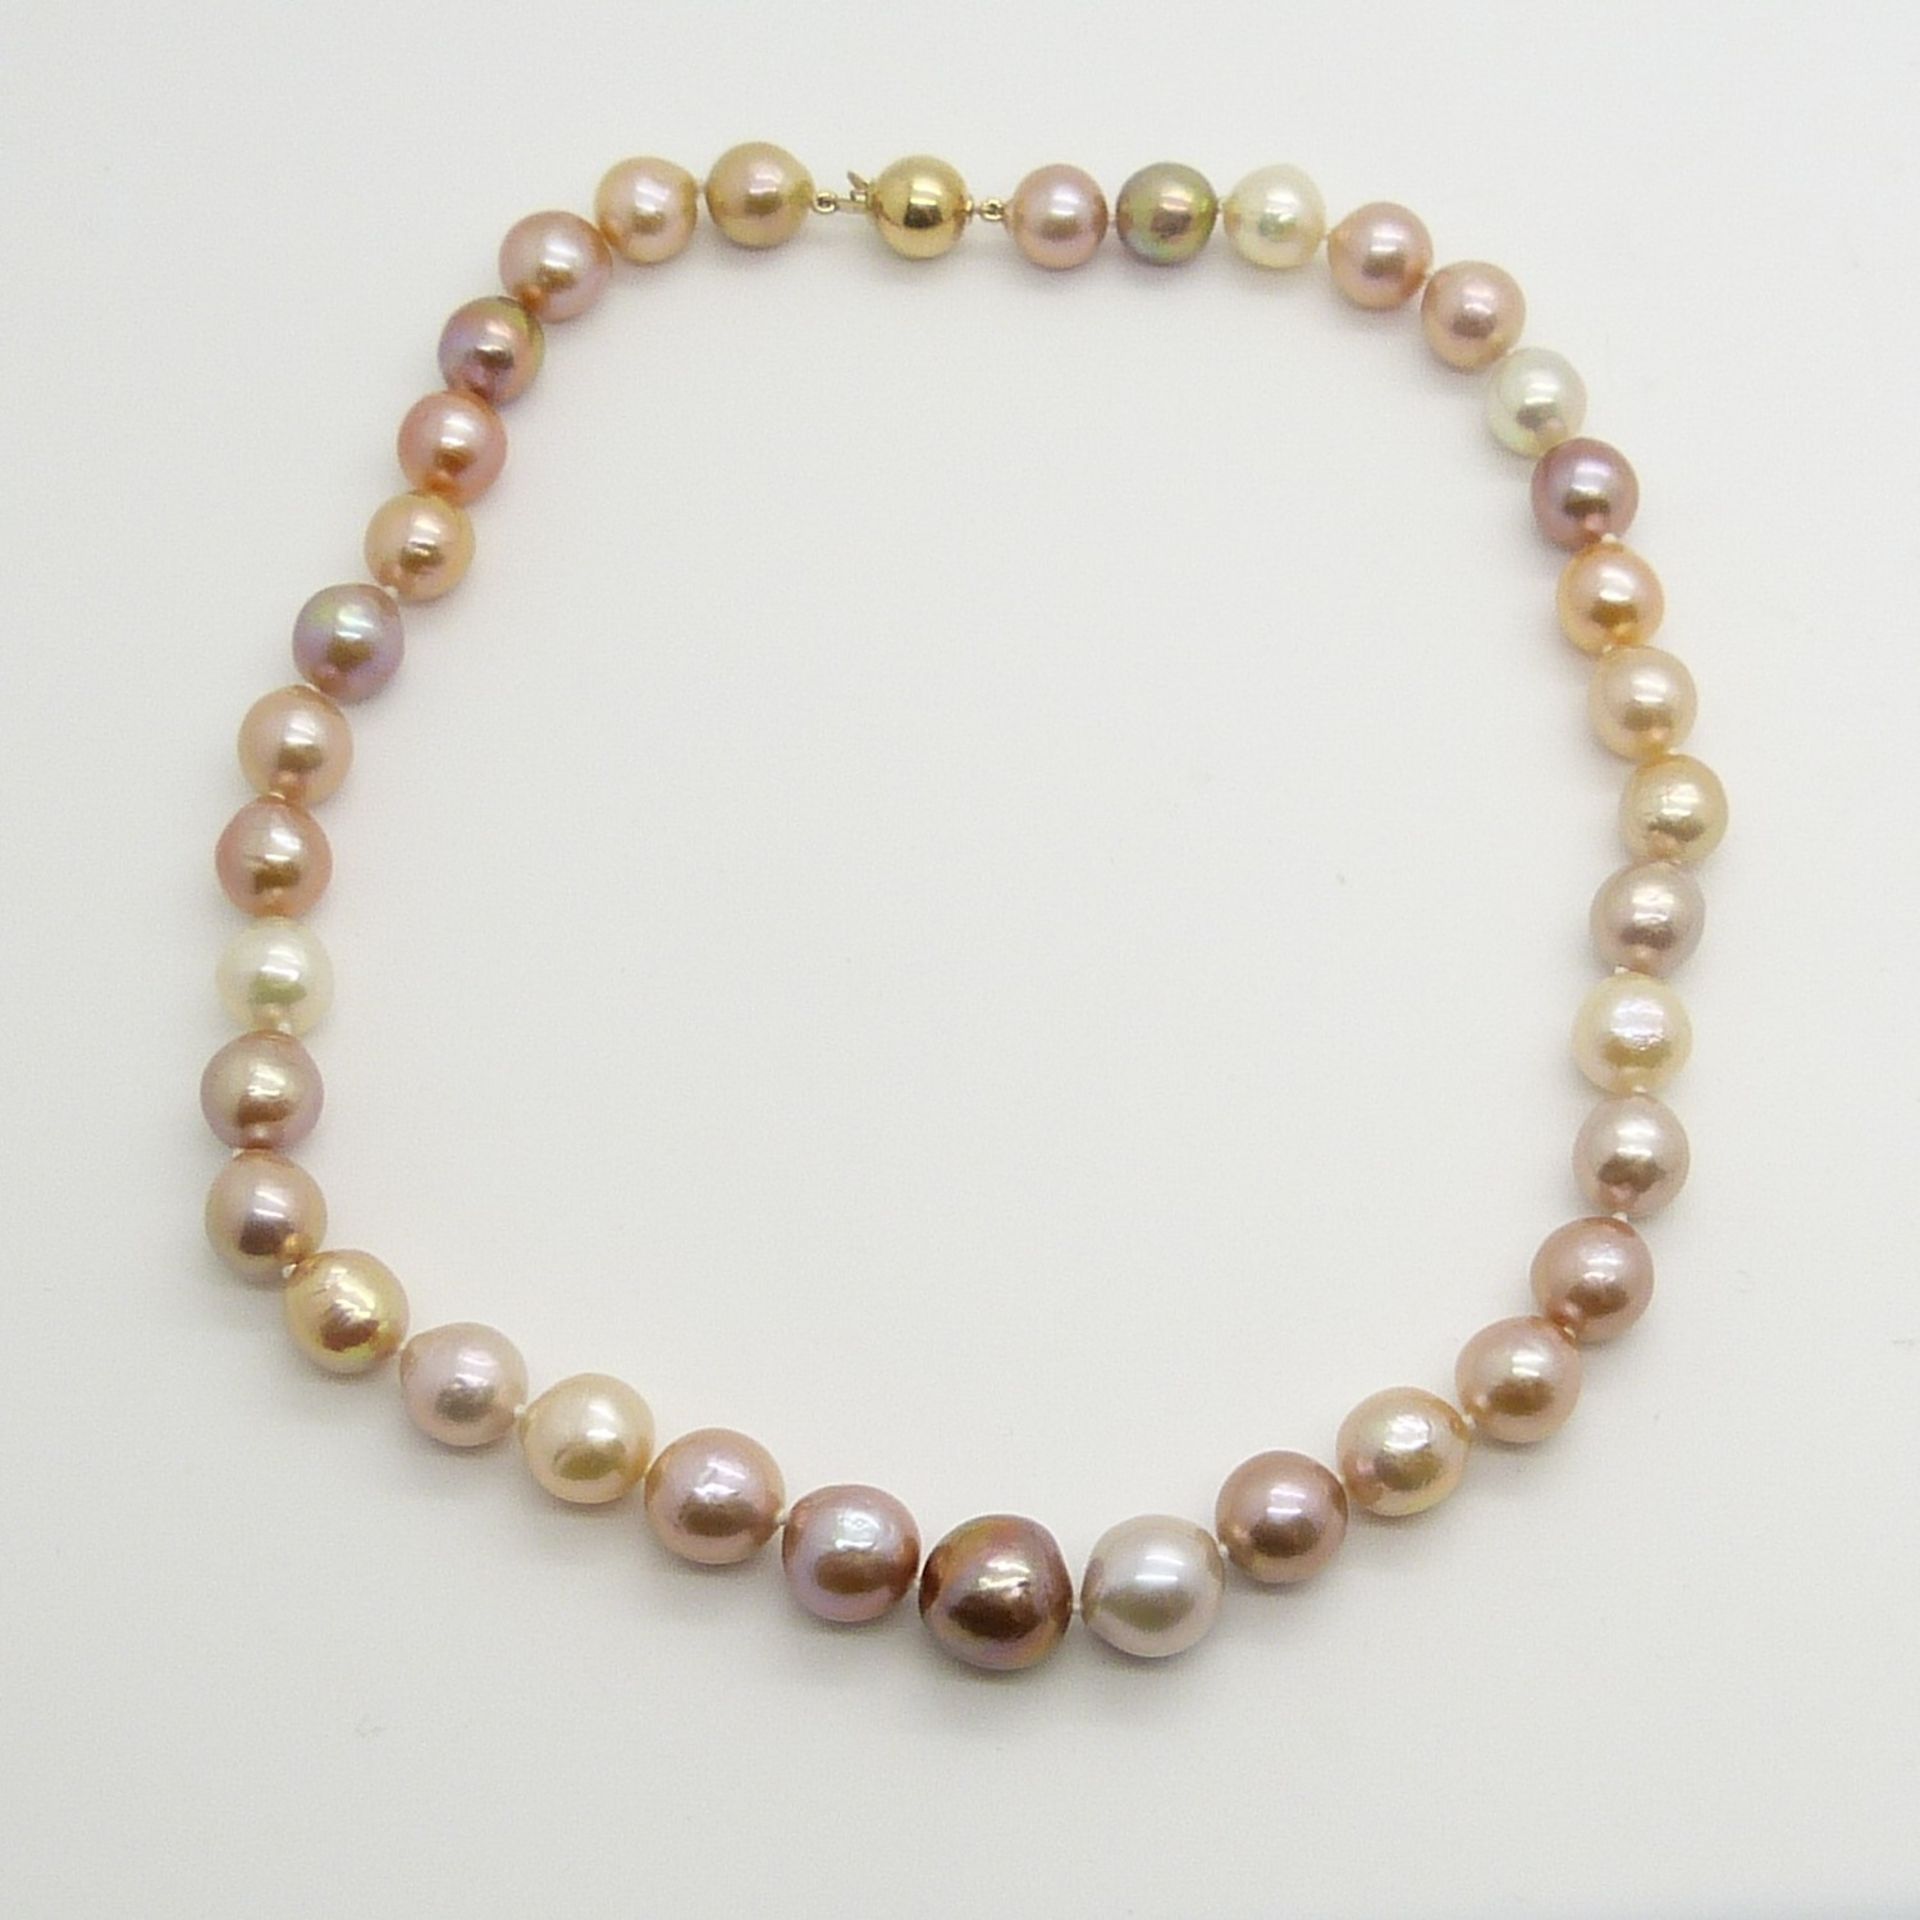 A necklace strung with peach, white, champagne and grey freshwater pearls with 9ct yellow gold clasp - Image 4 of 6